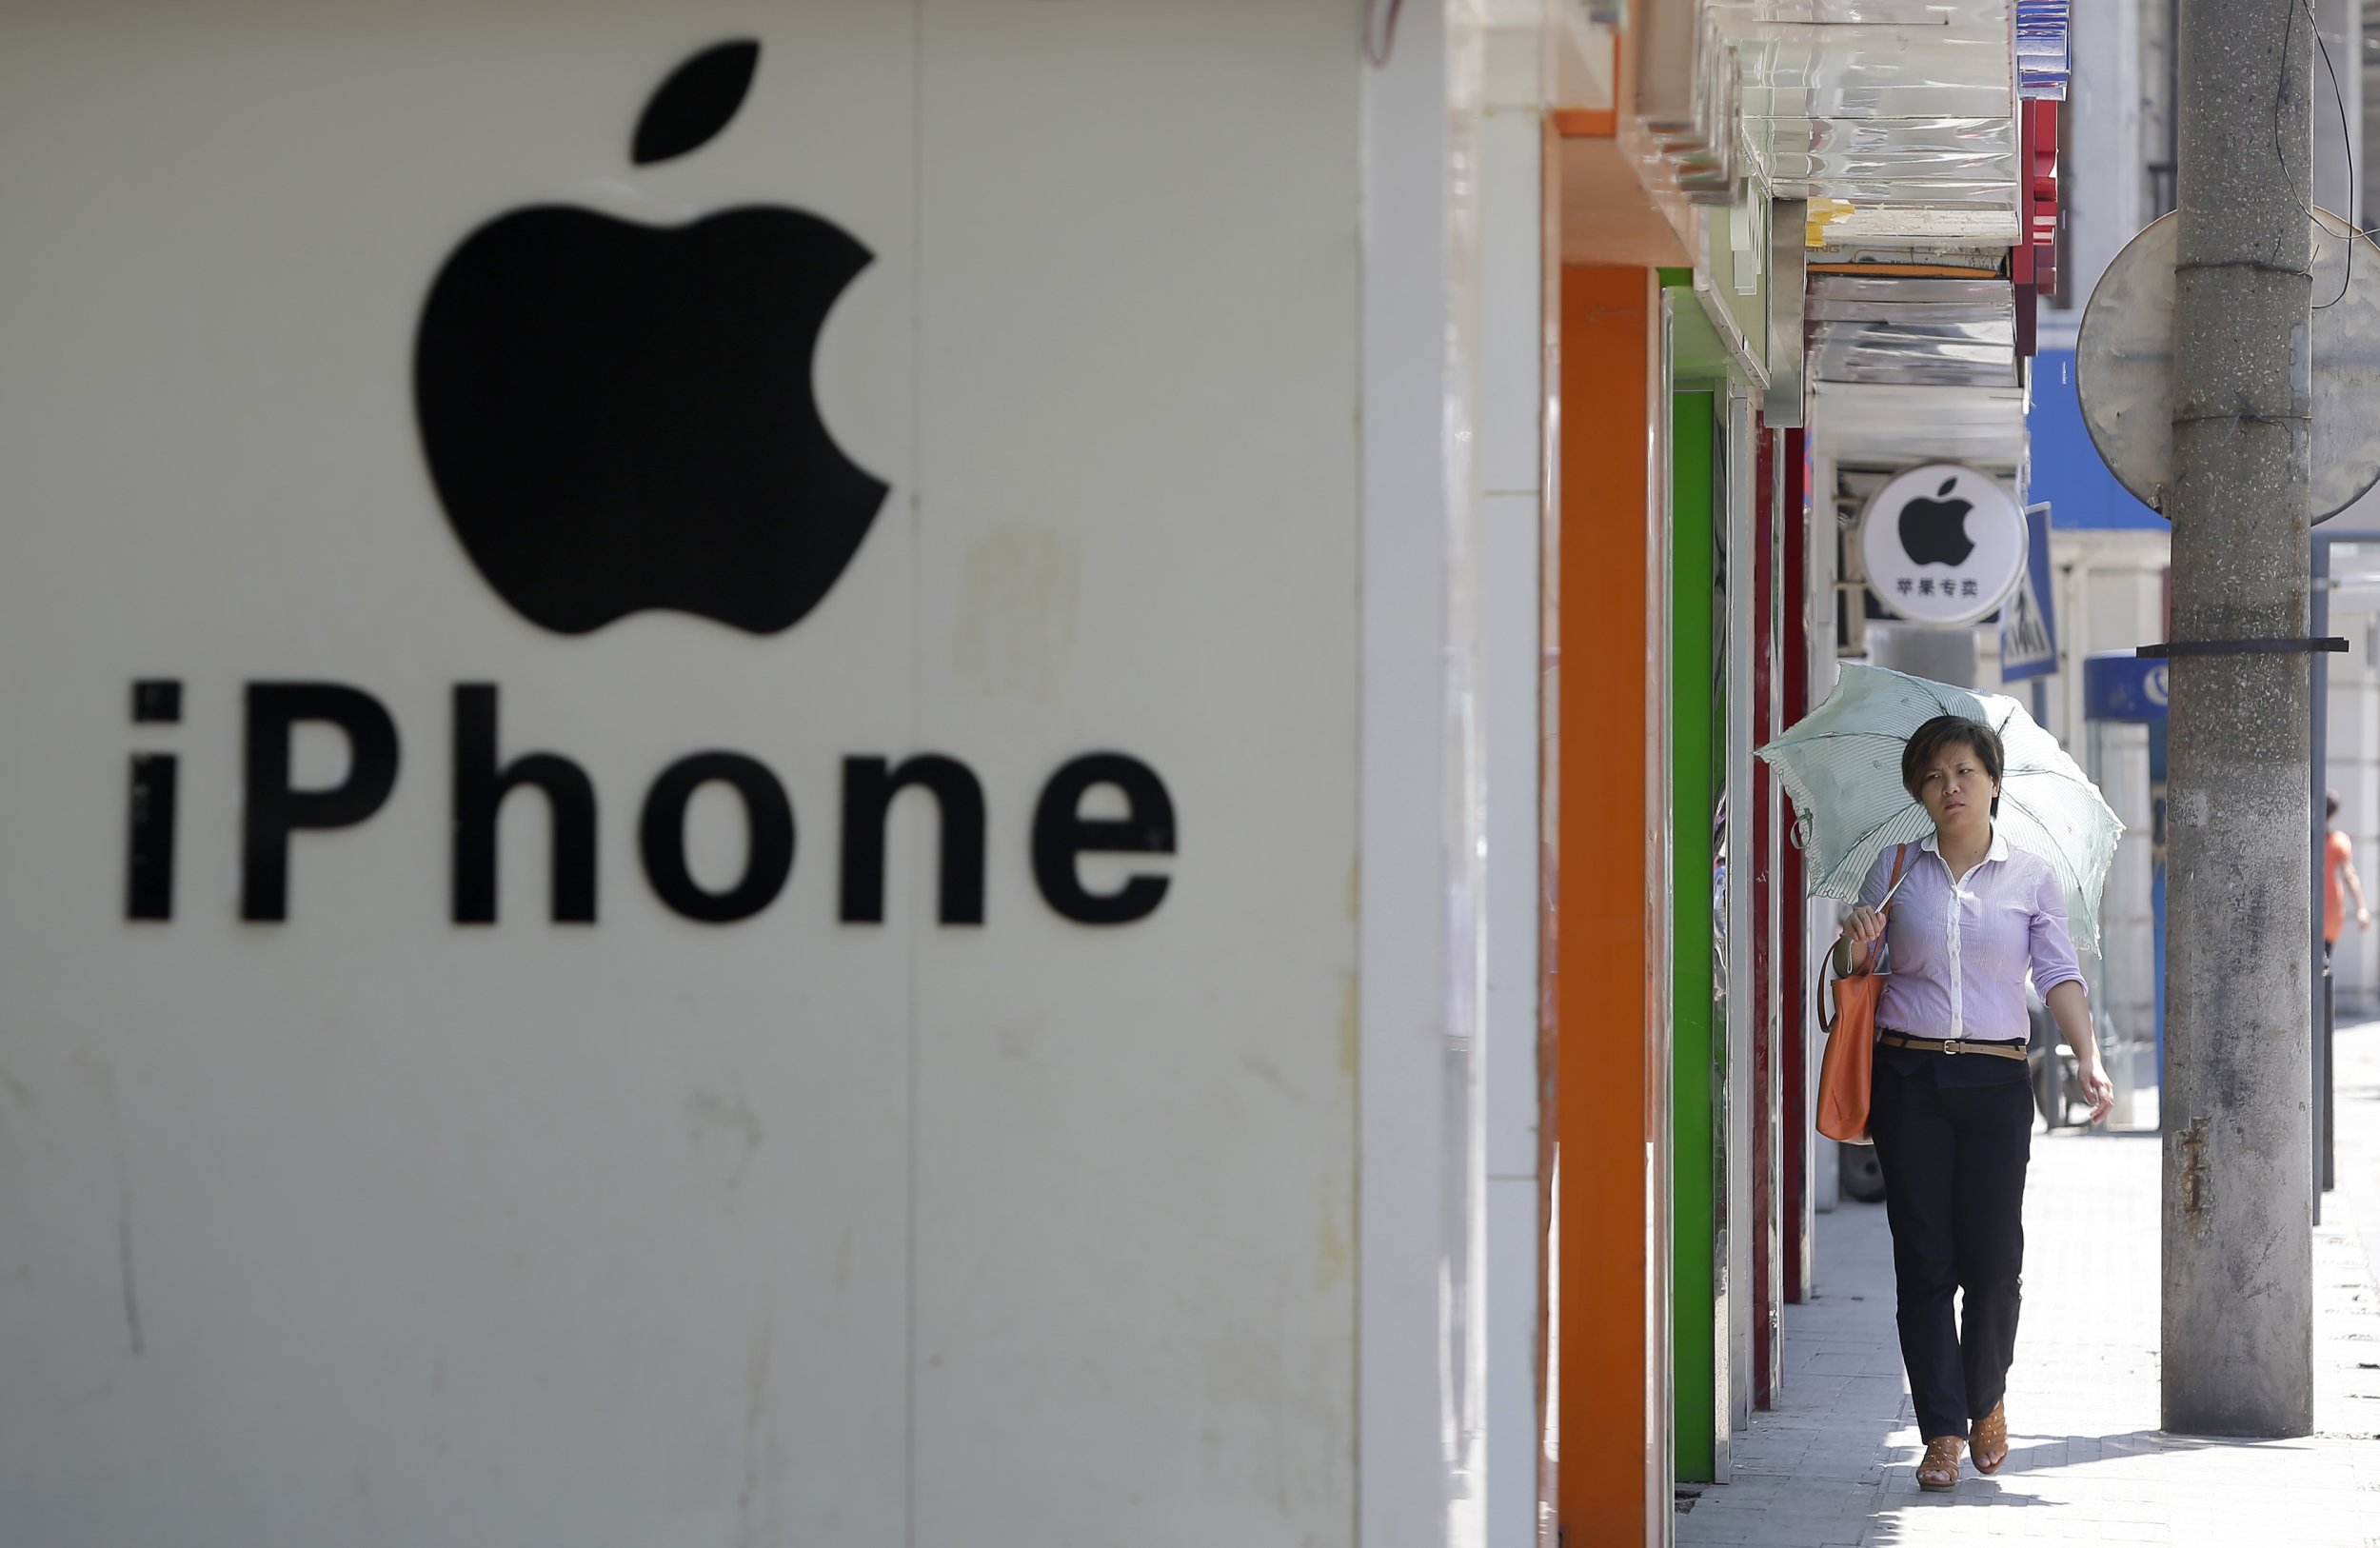 Apple Iphone 5s 5c Release Date Nears Deals With China Mobile Ntt Docomo May Boost Iphone